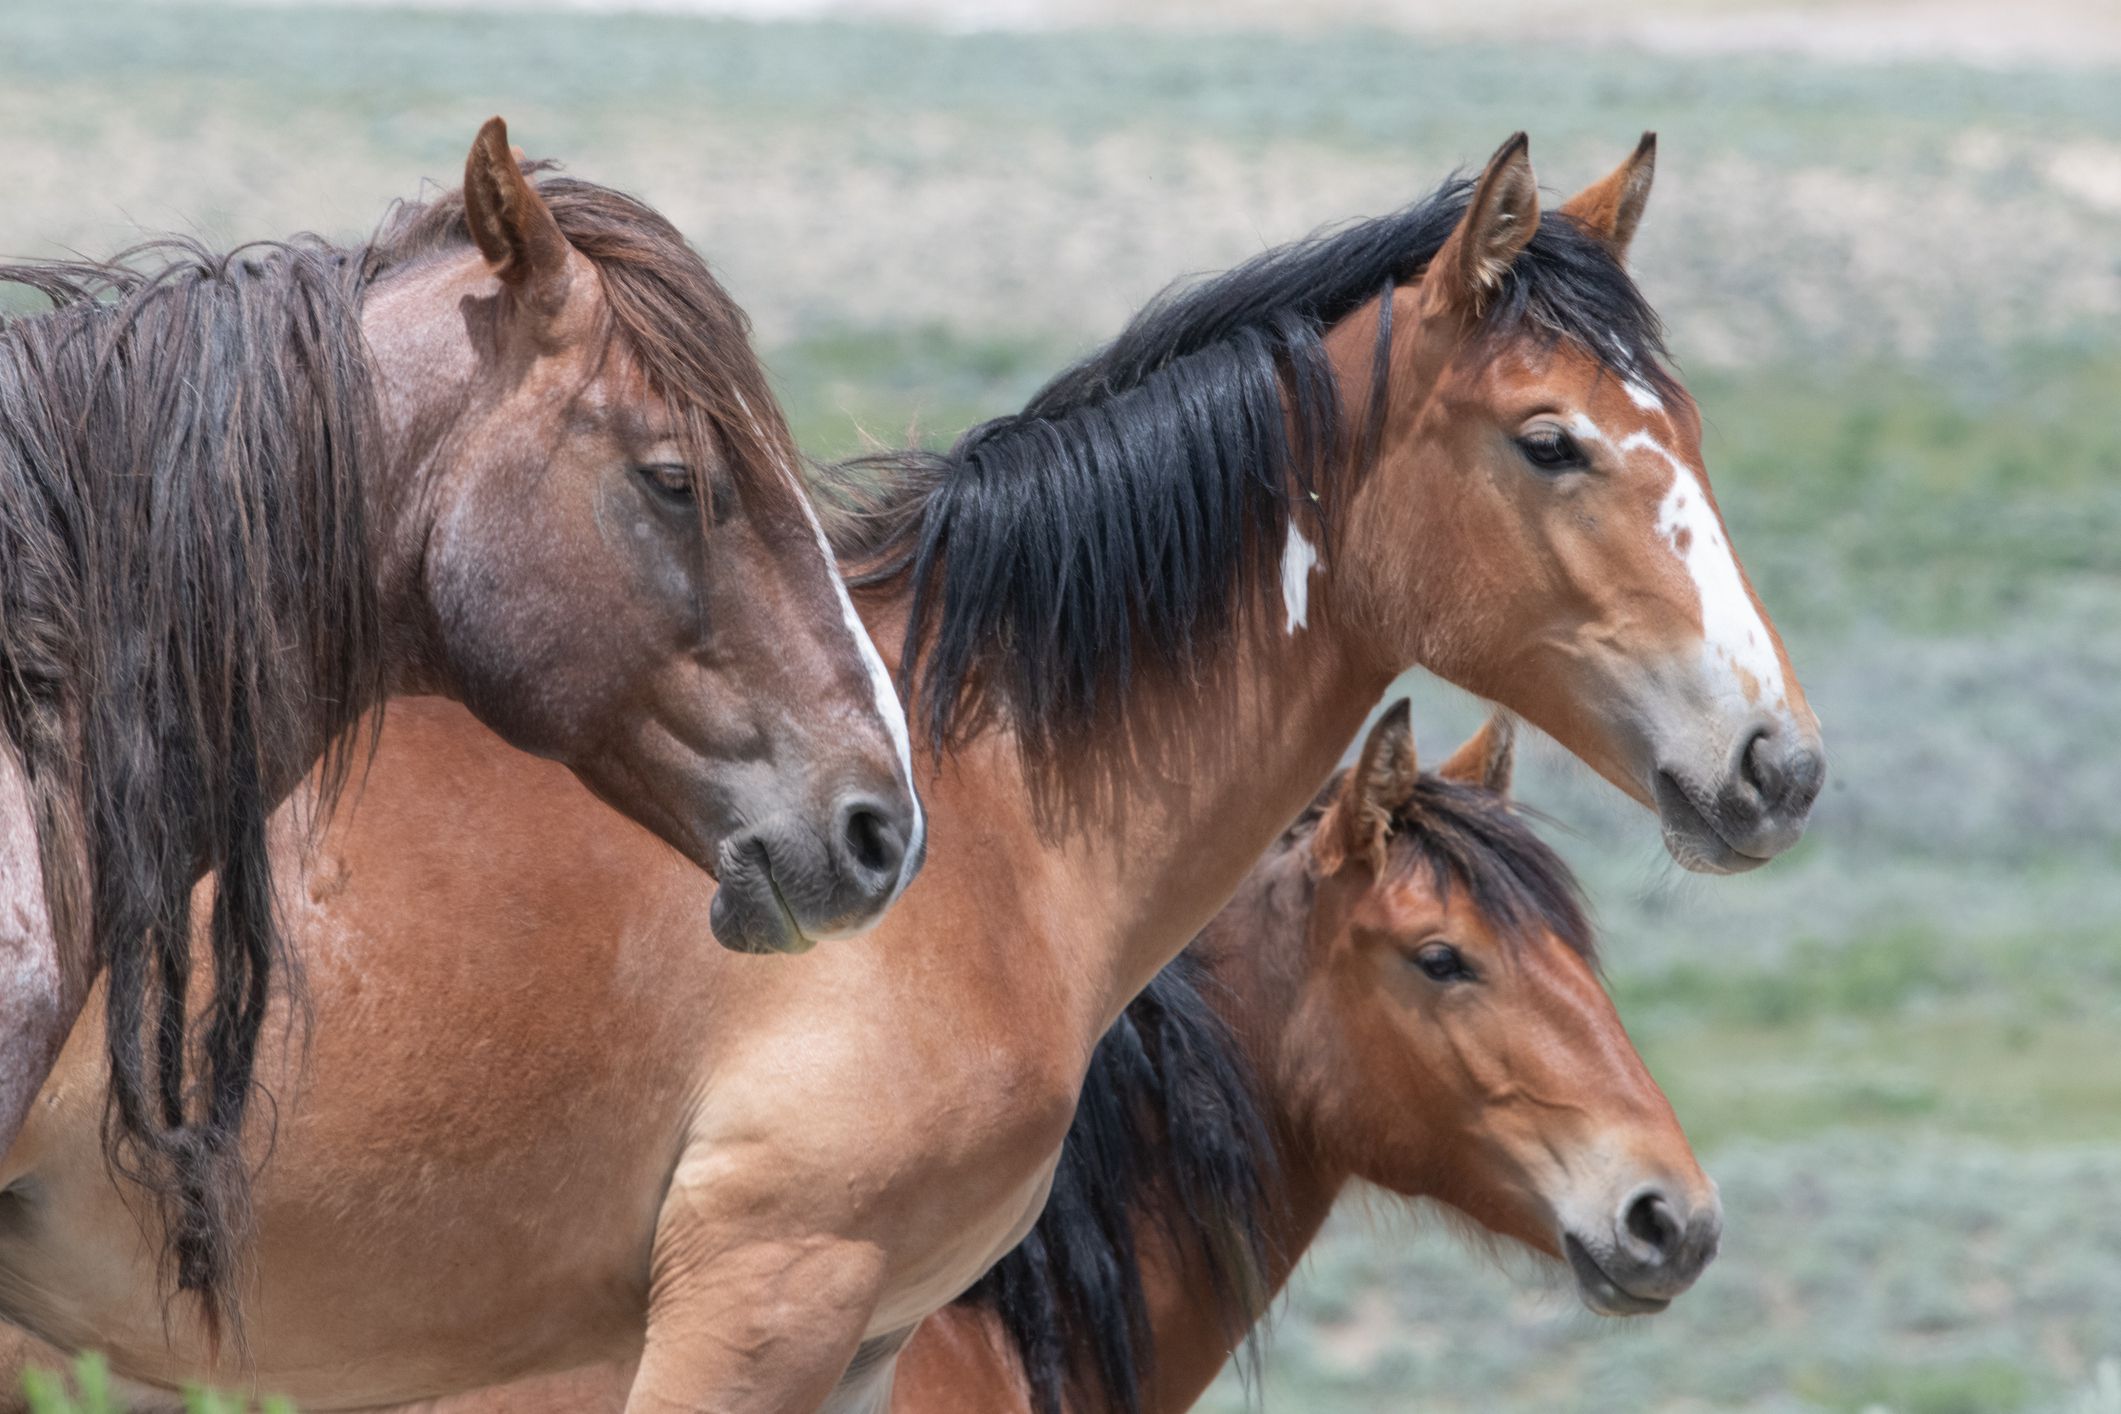 67 Wild Horses Die of Highly Contagious Illness in Federal Care